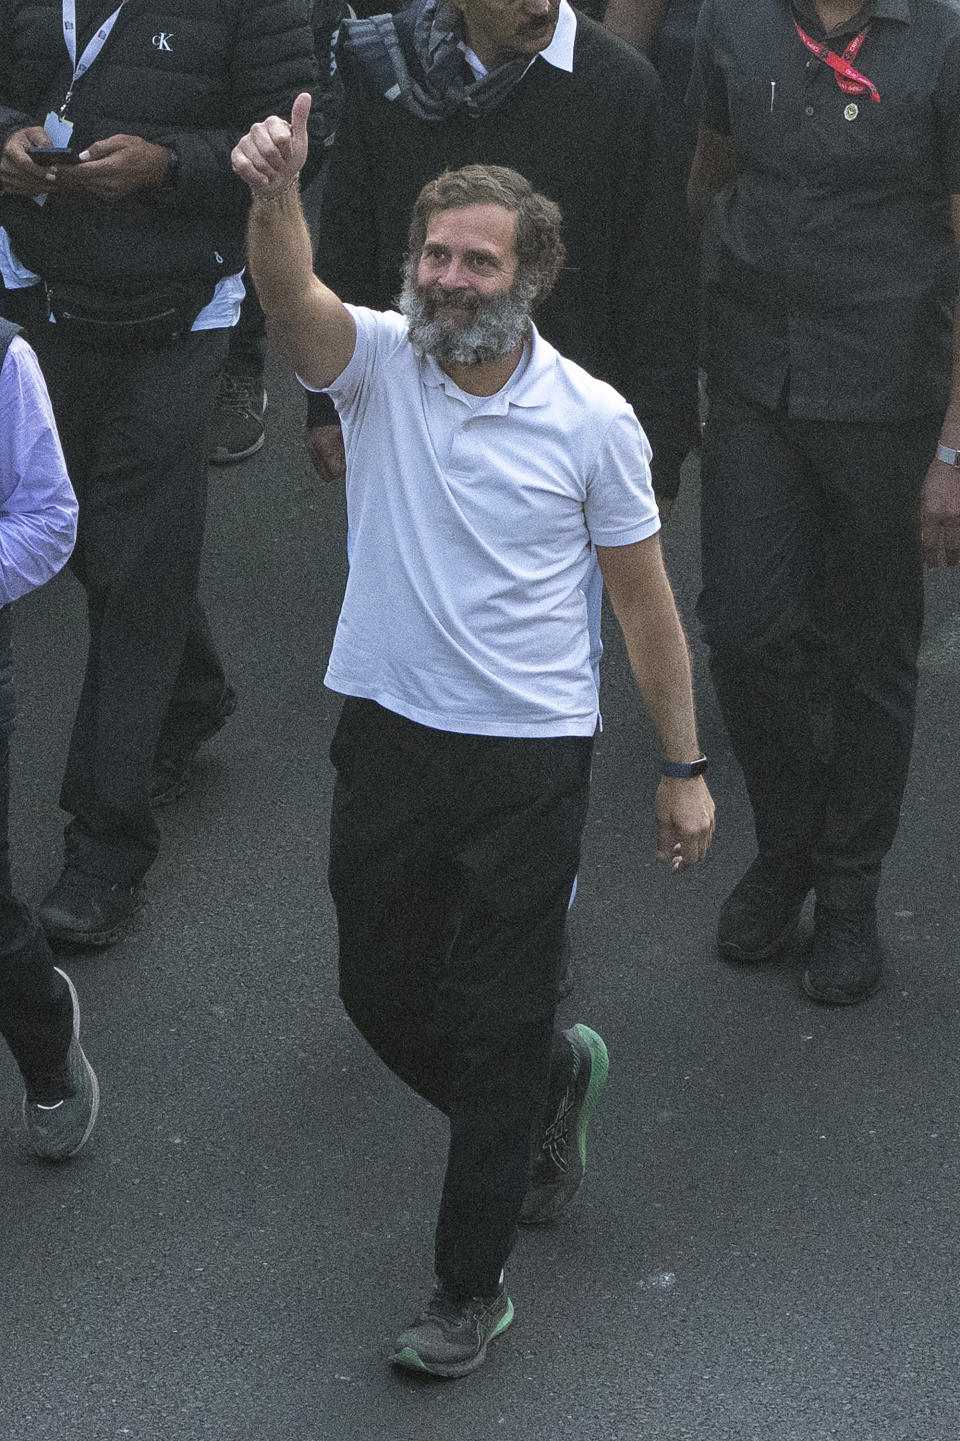 Rahul Gandhi, leader of India's opposition Congress party, gestures as he walks with his supporters during a march, in New Delhi, India, Saturday, Dec. 24, 2022. Rahul Gandhi, leader of India's beleaguered opposition Congress party, on Saturday marched in New Delhi along with his supporters, part of his five-month-long 3,570km (2,218-mile) countrywide trek through 12 states that began 105 days ago.(AP Photo/Altaf Qadri)